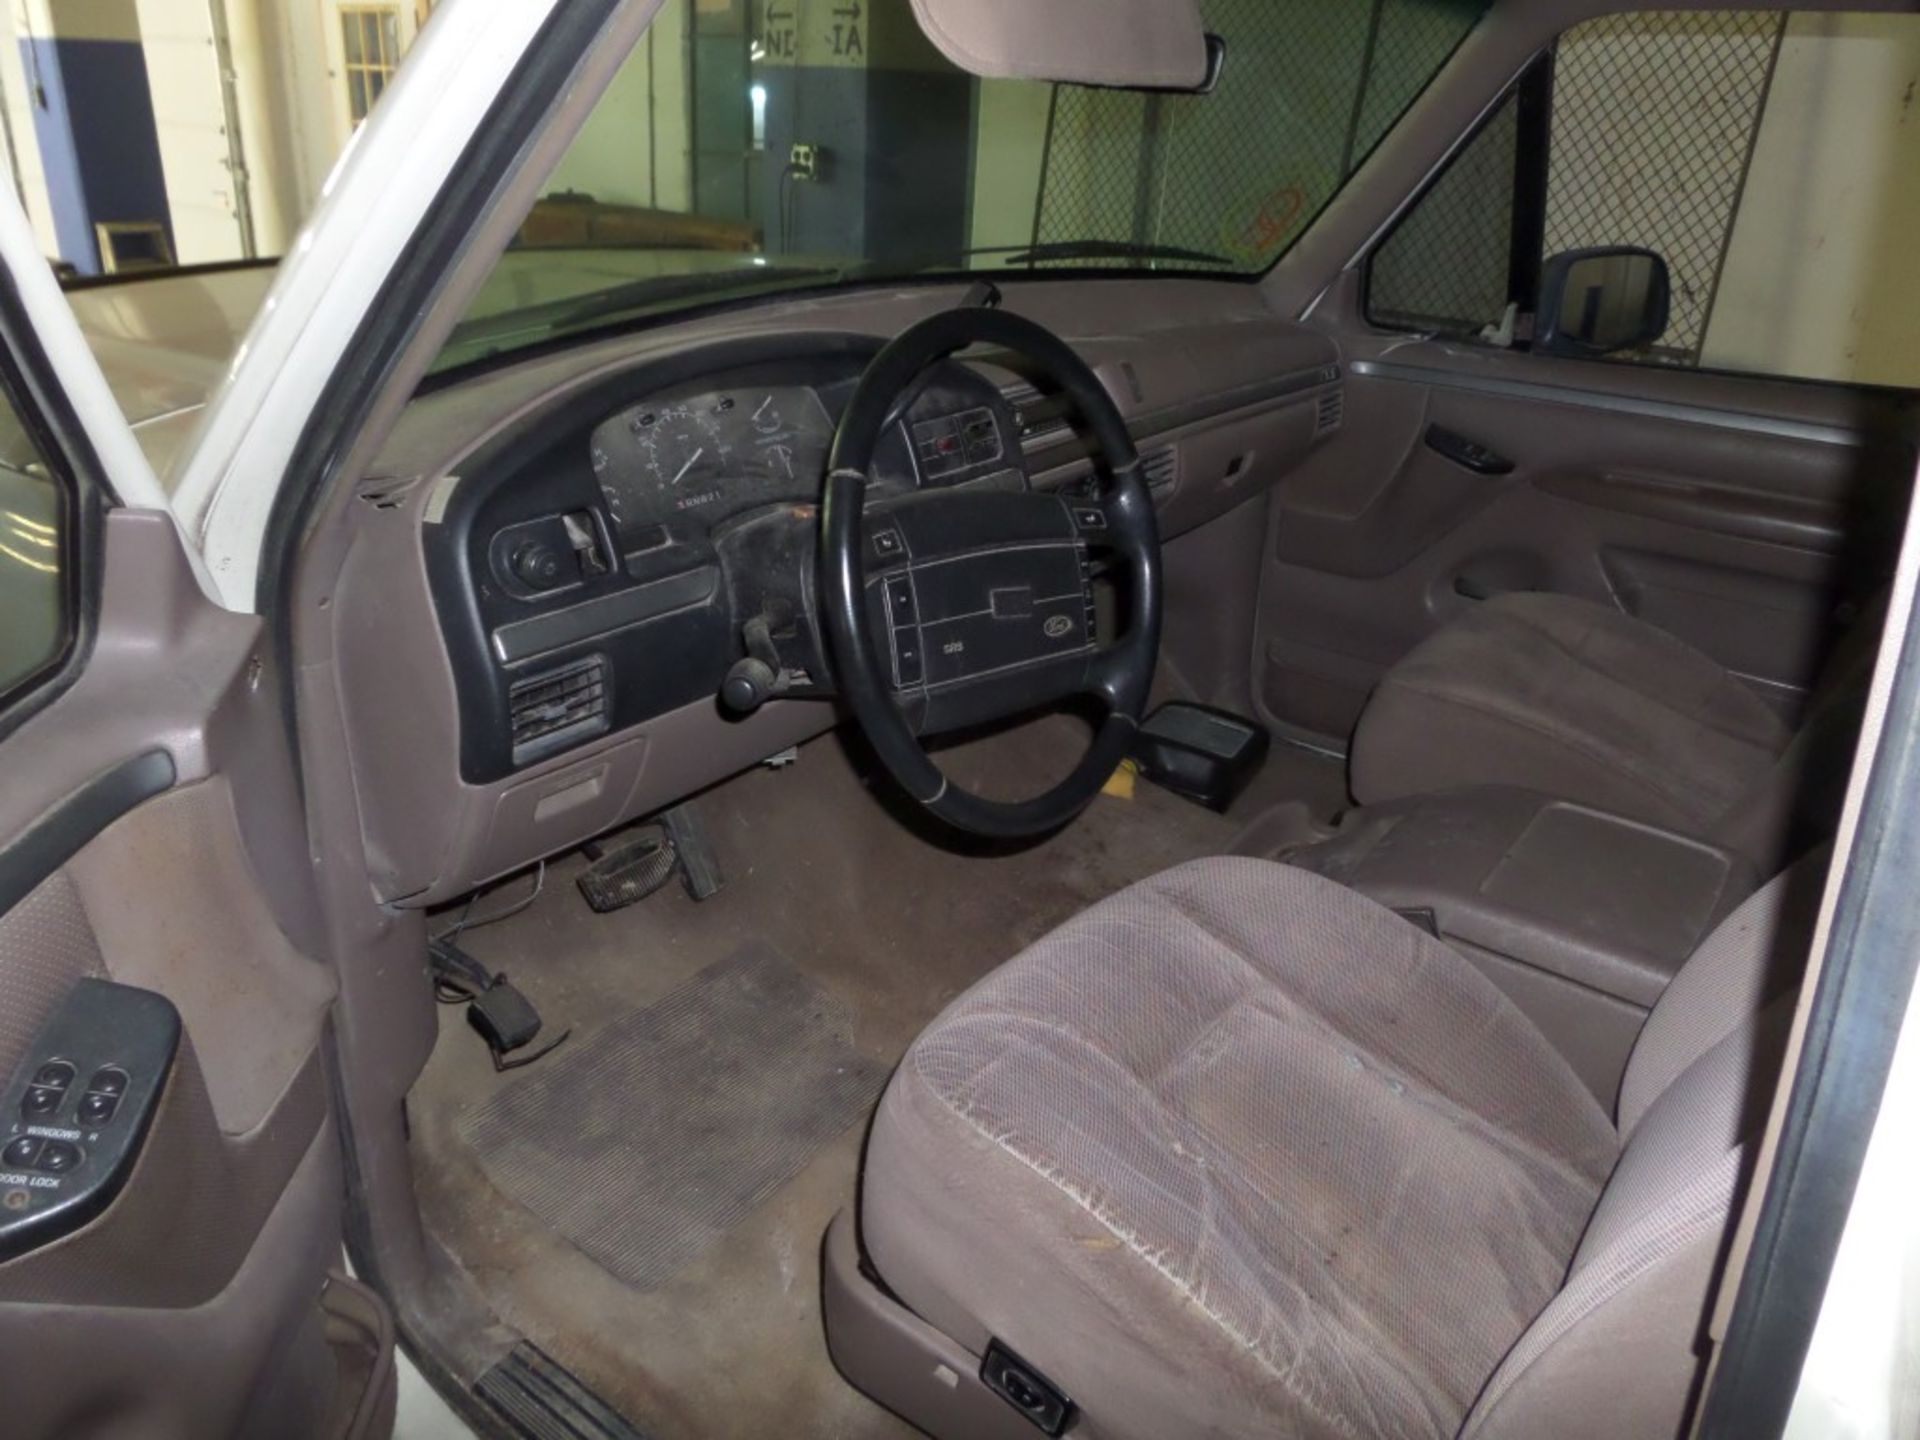 1995 Ford F150 4X4 Ext. Cab. Runs & Drives - IL Title 211,000 Miles - Image 7 of 9